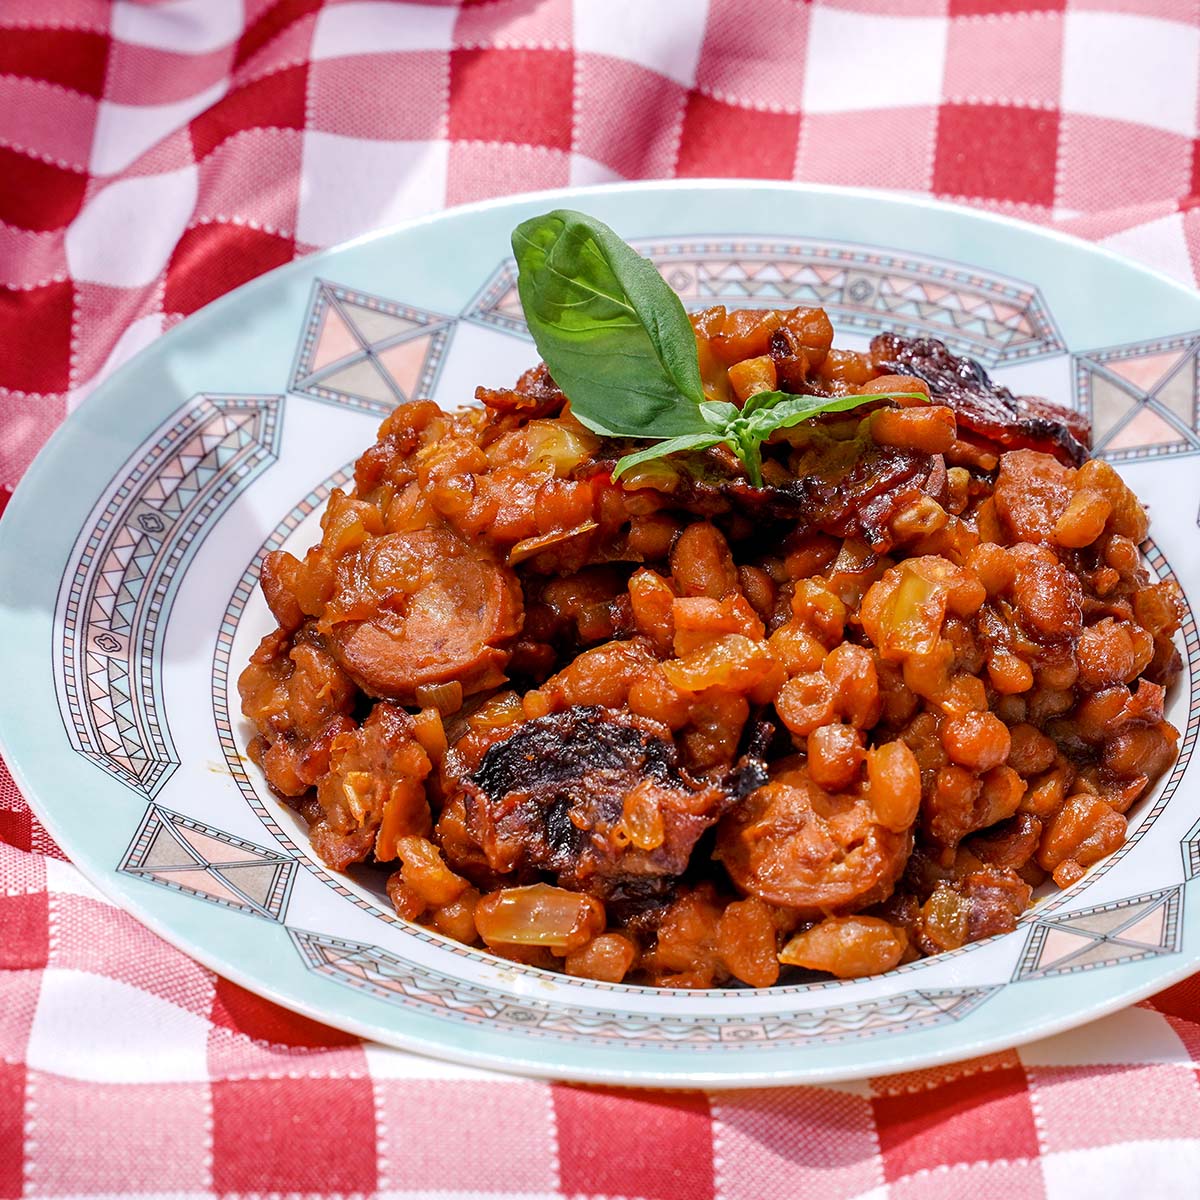 bowl of Baked Beans with Sugar and Bacon